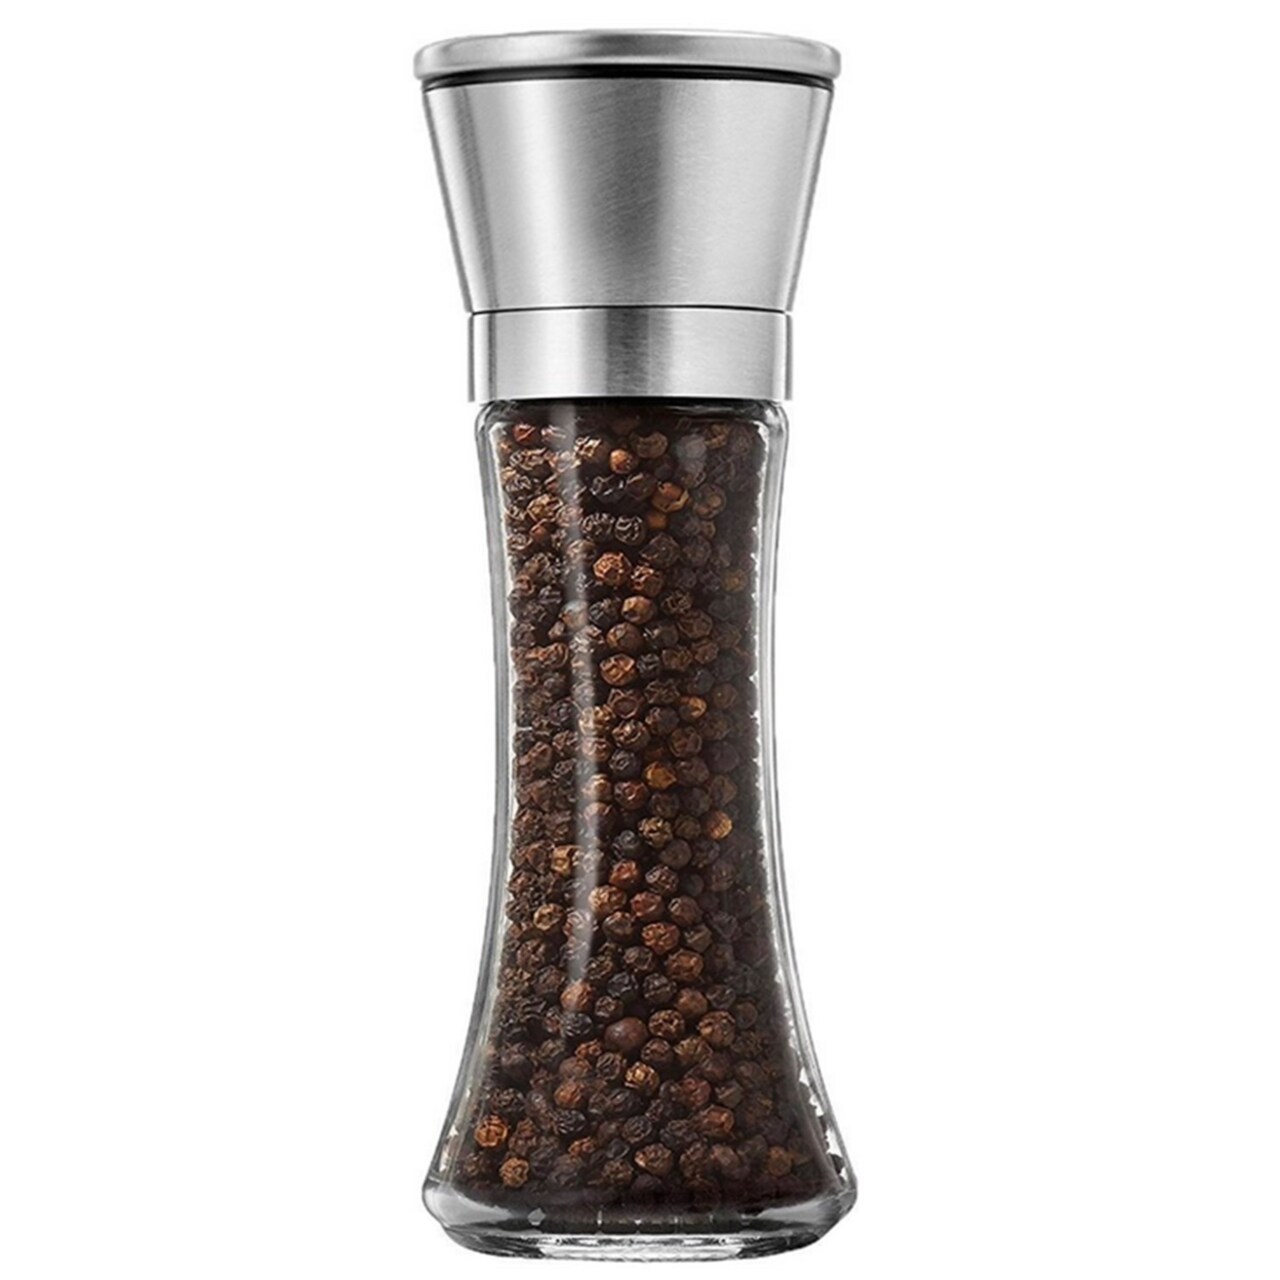 Salt And Pepper Grinder Refillable Stainless Steel Shakers With